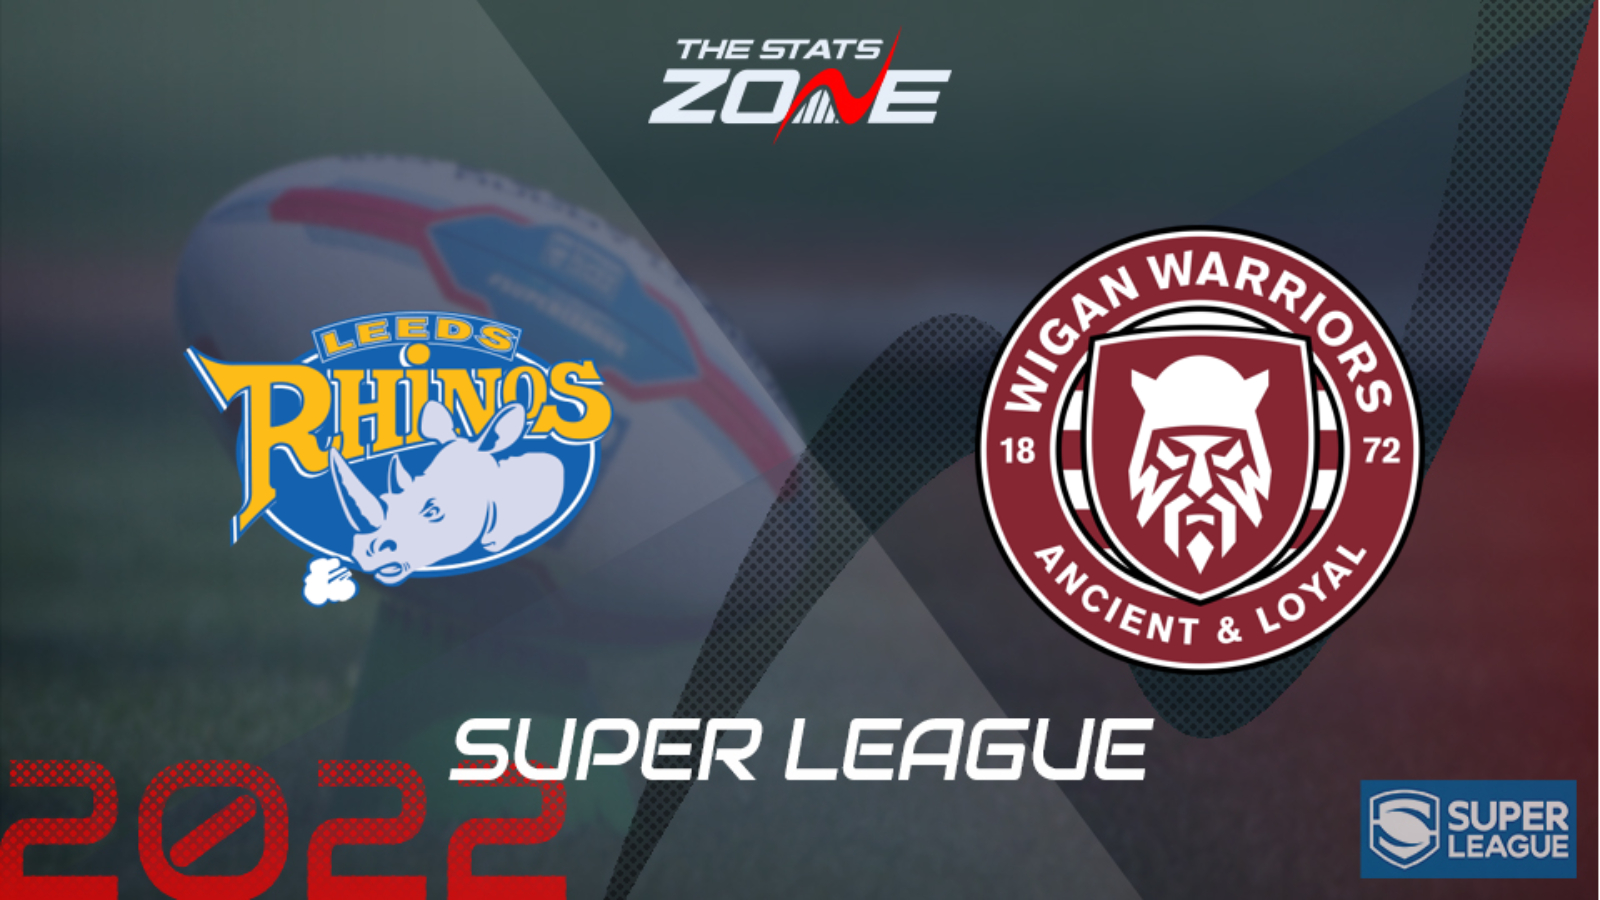 Leeds Rhinos vs Wigan Warriors Preview and Prediction Super League 2022